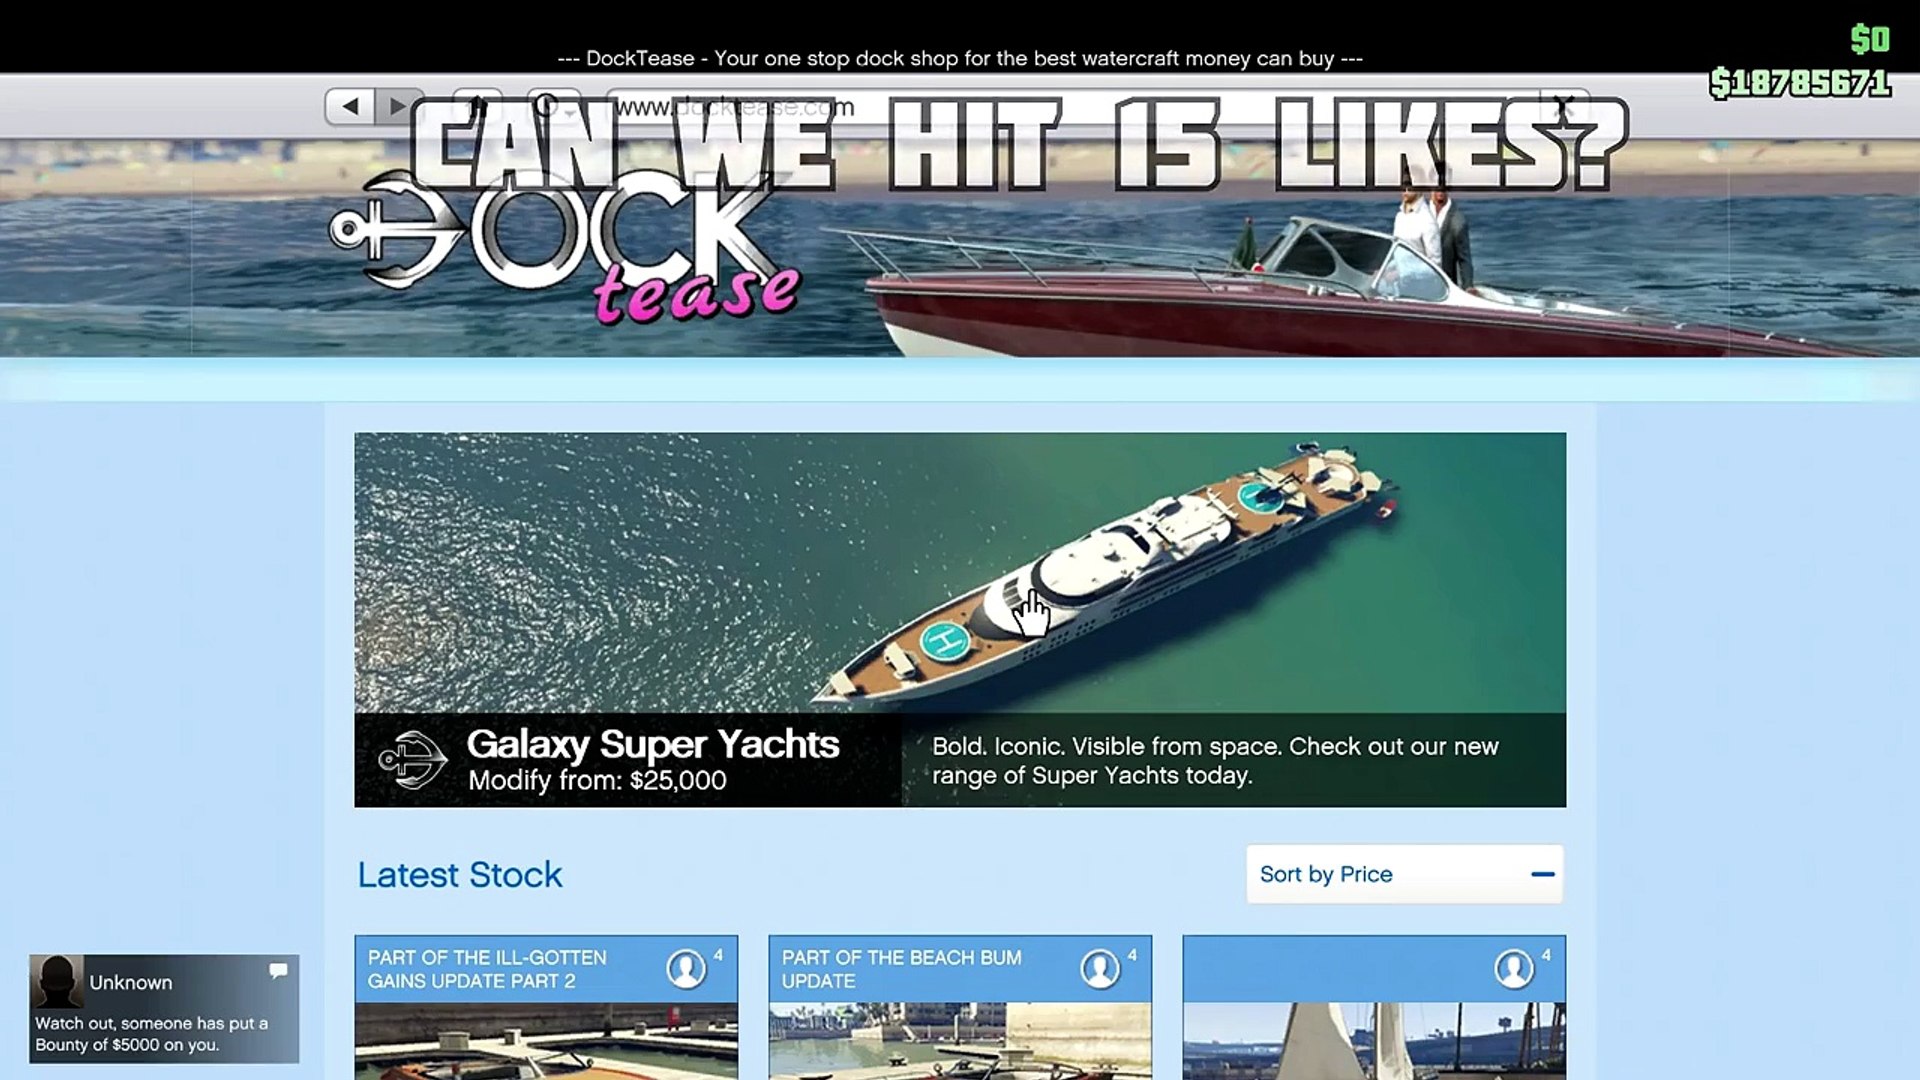 Gta 5 Online Buy The Yacht For Only 25 000 Xbox 360 Xb1 Ps3 Ps4 Pc Video Dailymotion